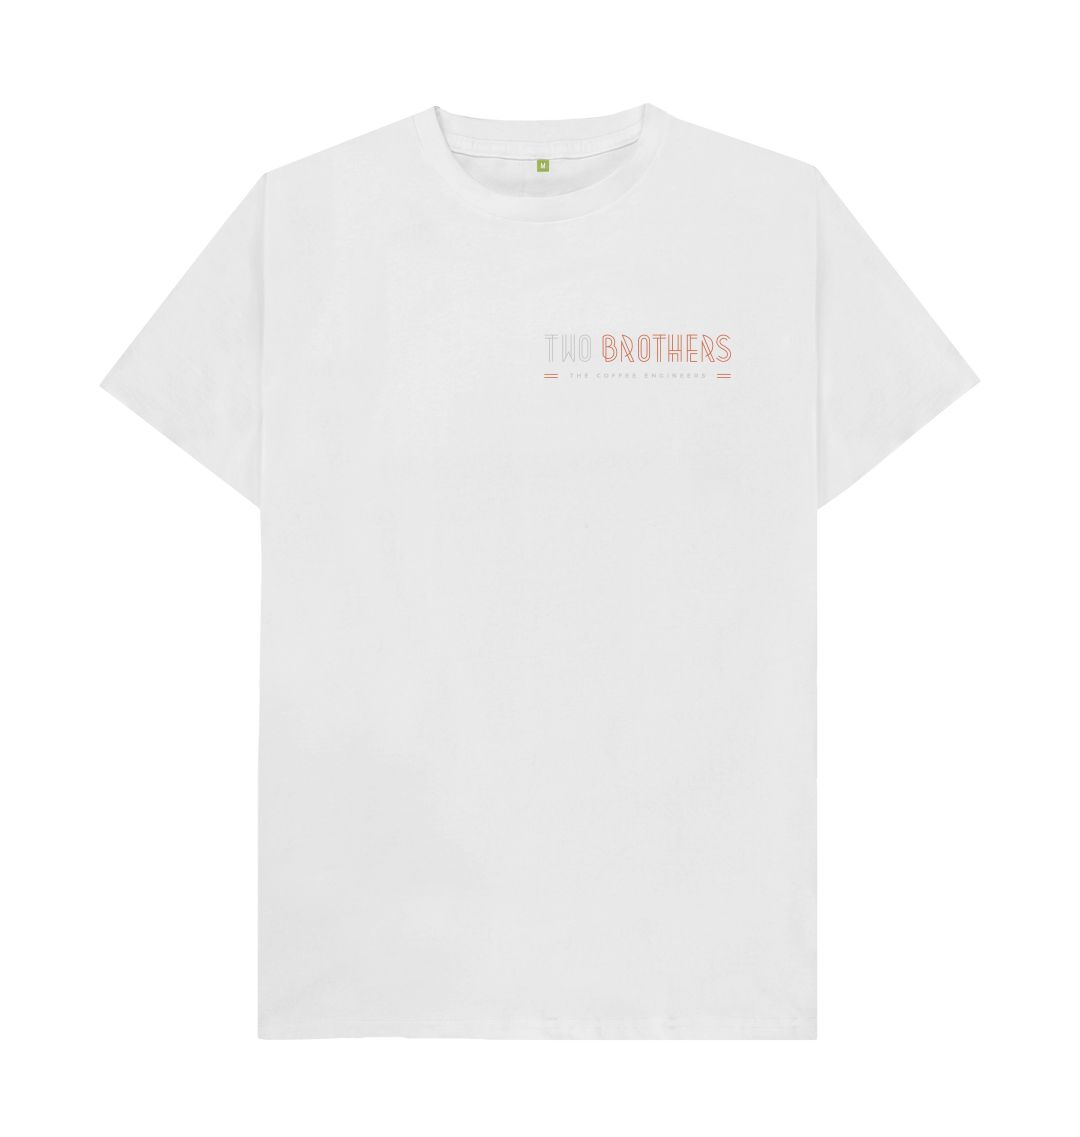 T-shirt Bullock Loose Fit • TwoBrothers Store • T-Shirts